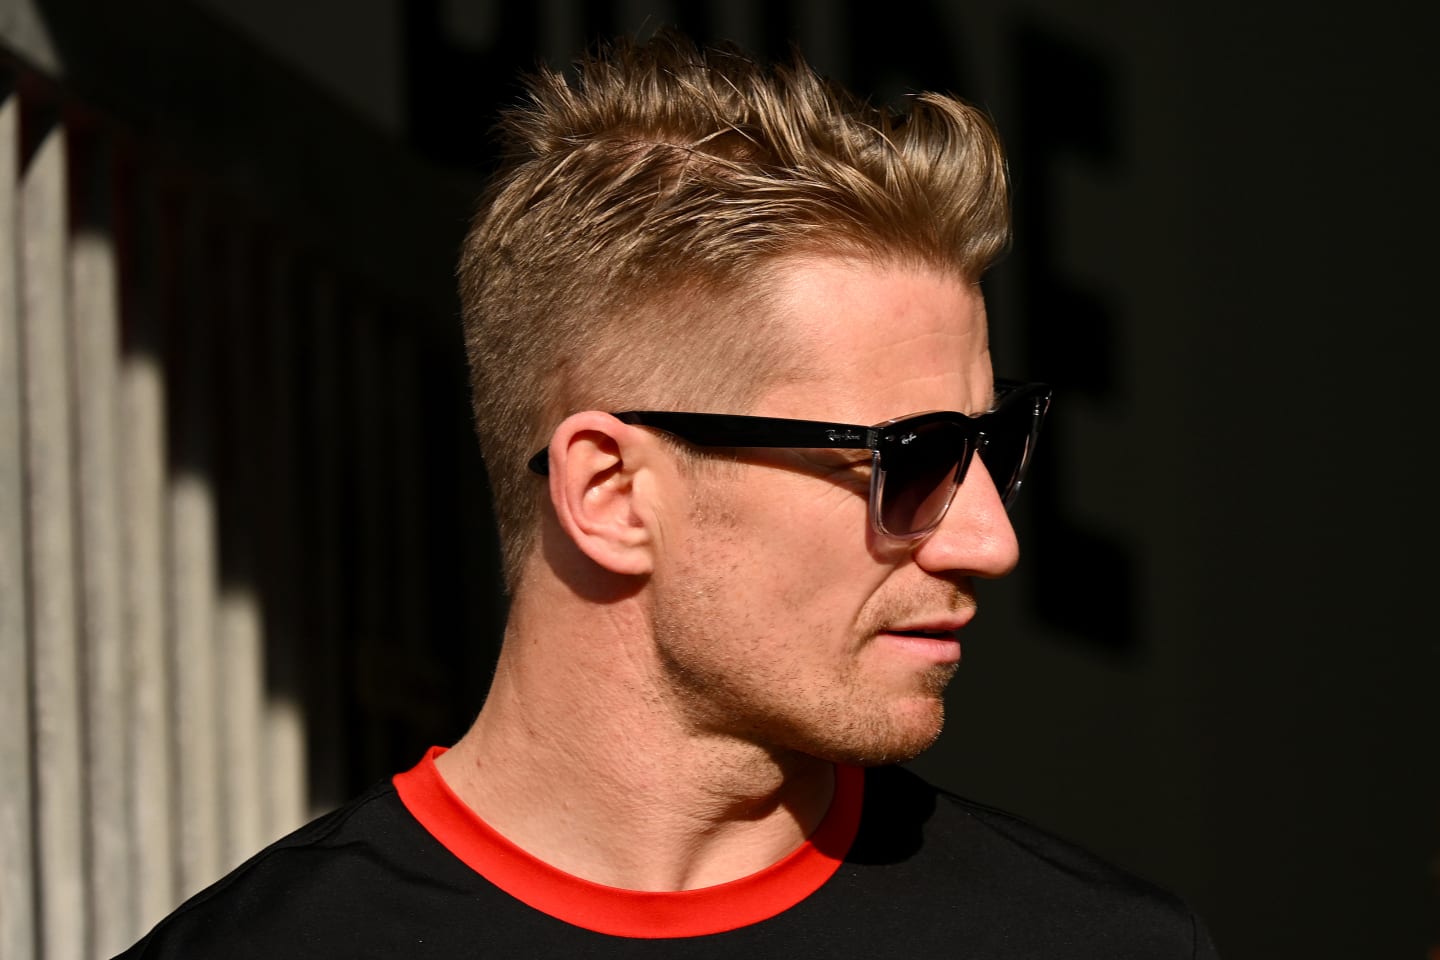 BAHRAIN, BAHRAIN - MARCH 05: Nico Hulkenberg of Germany and Haas F1 looks on prior to the F1 Grand Prix of Bahrain at Bahrain International Circuit on March 05, 2023 in Bahrain, Bahrain. (Photo by Clive Mason/Getty Images)